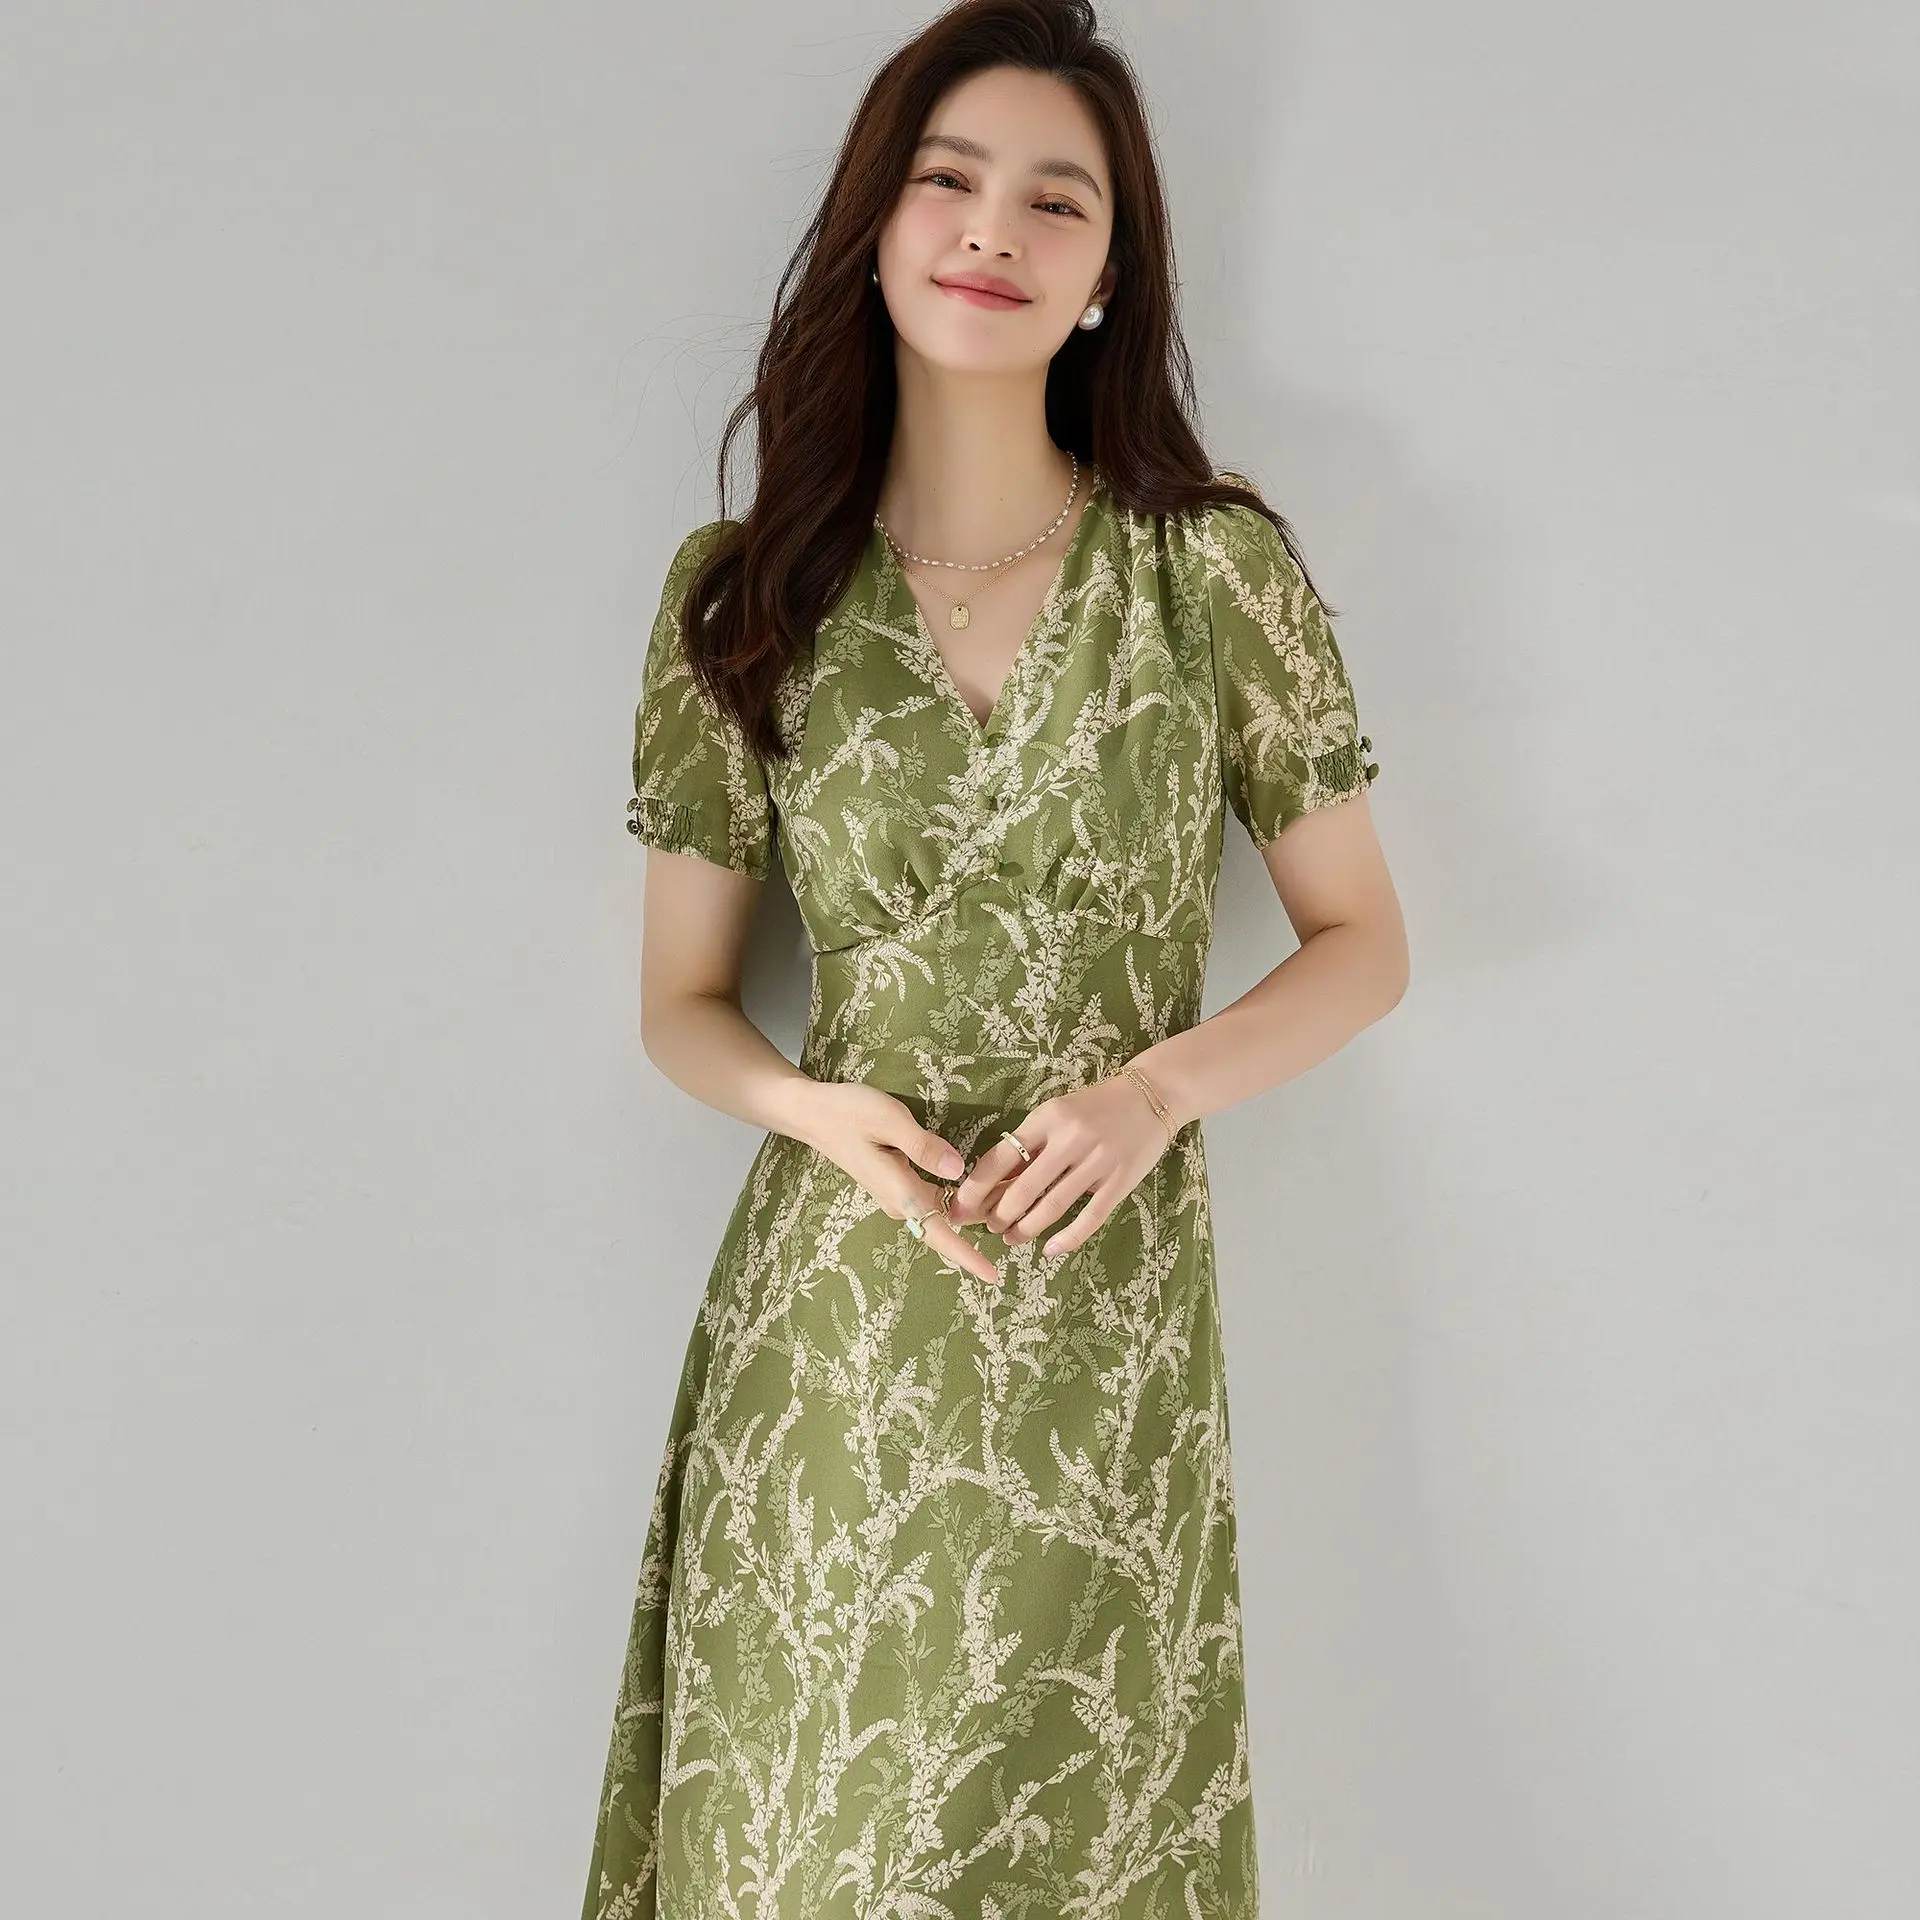 

Feminine and Flattering V-neck Women's Chiffon Dress with Slimming Effect in Avocado Green for Any Occasion